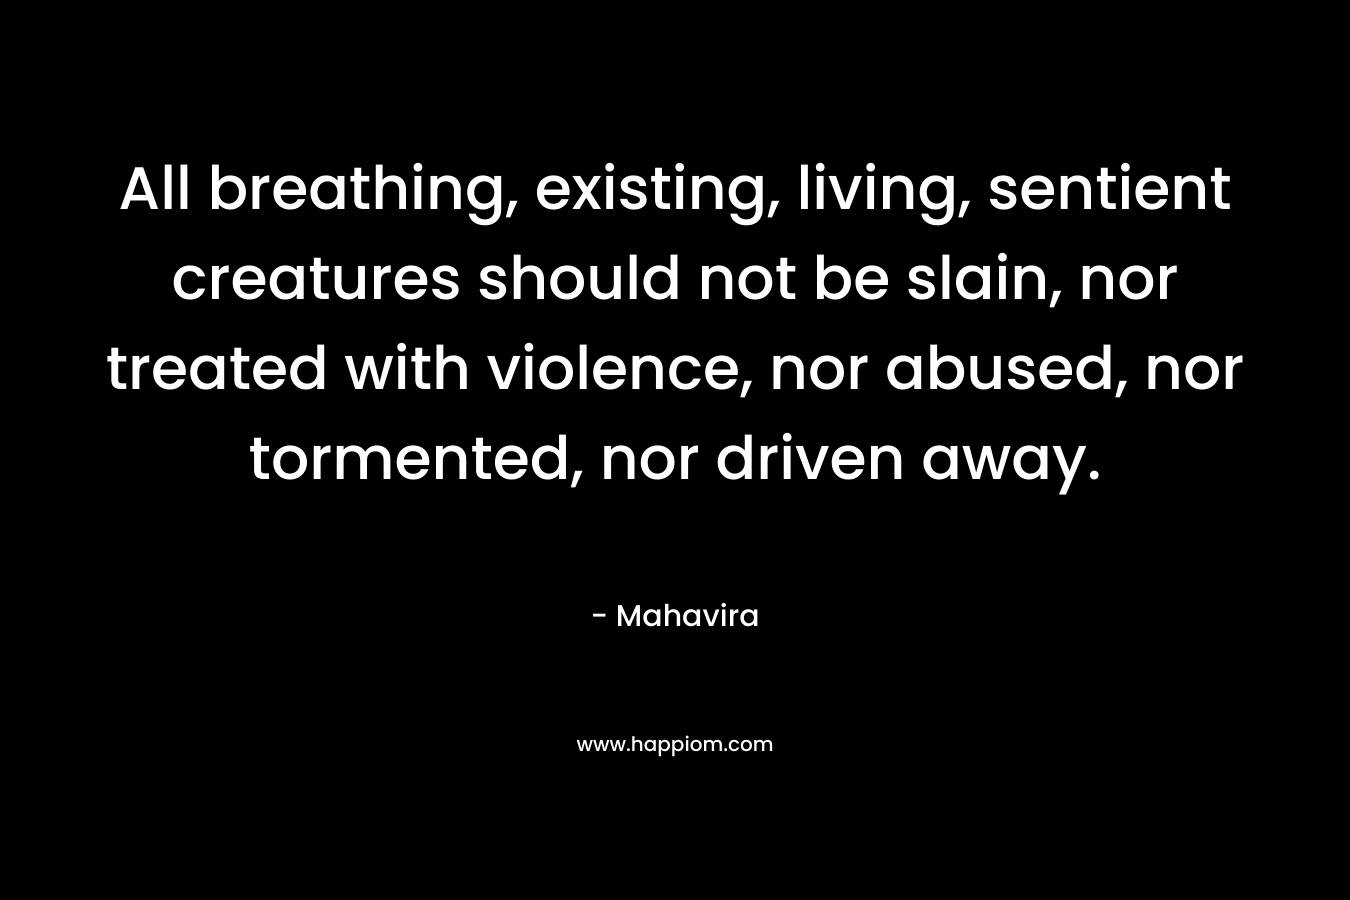 All breathing, existing, living, sentient creatures should not be slain, nor treated with violence, nor abused, nor tormented, nor driven away.